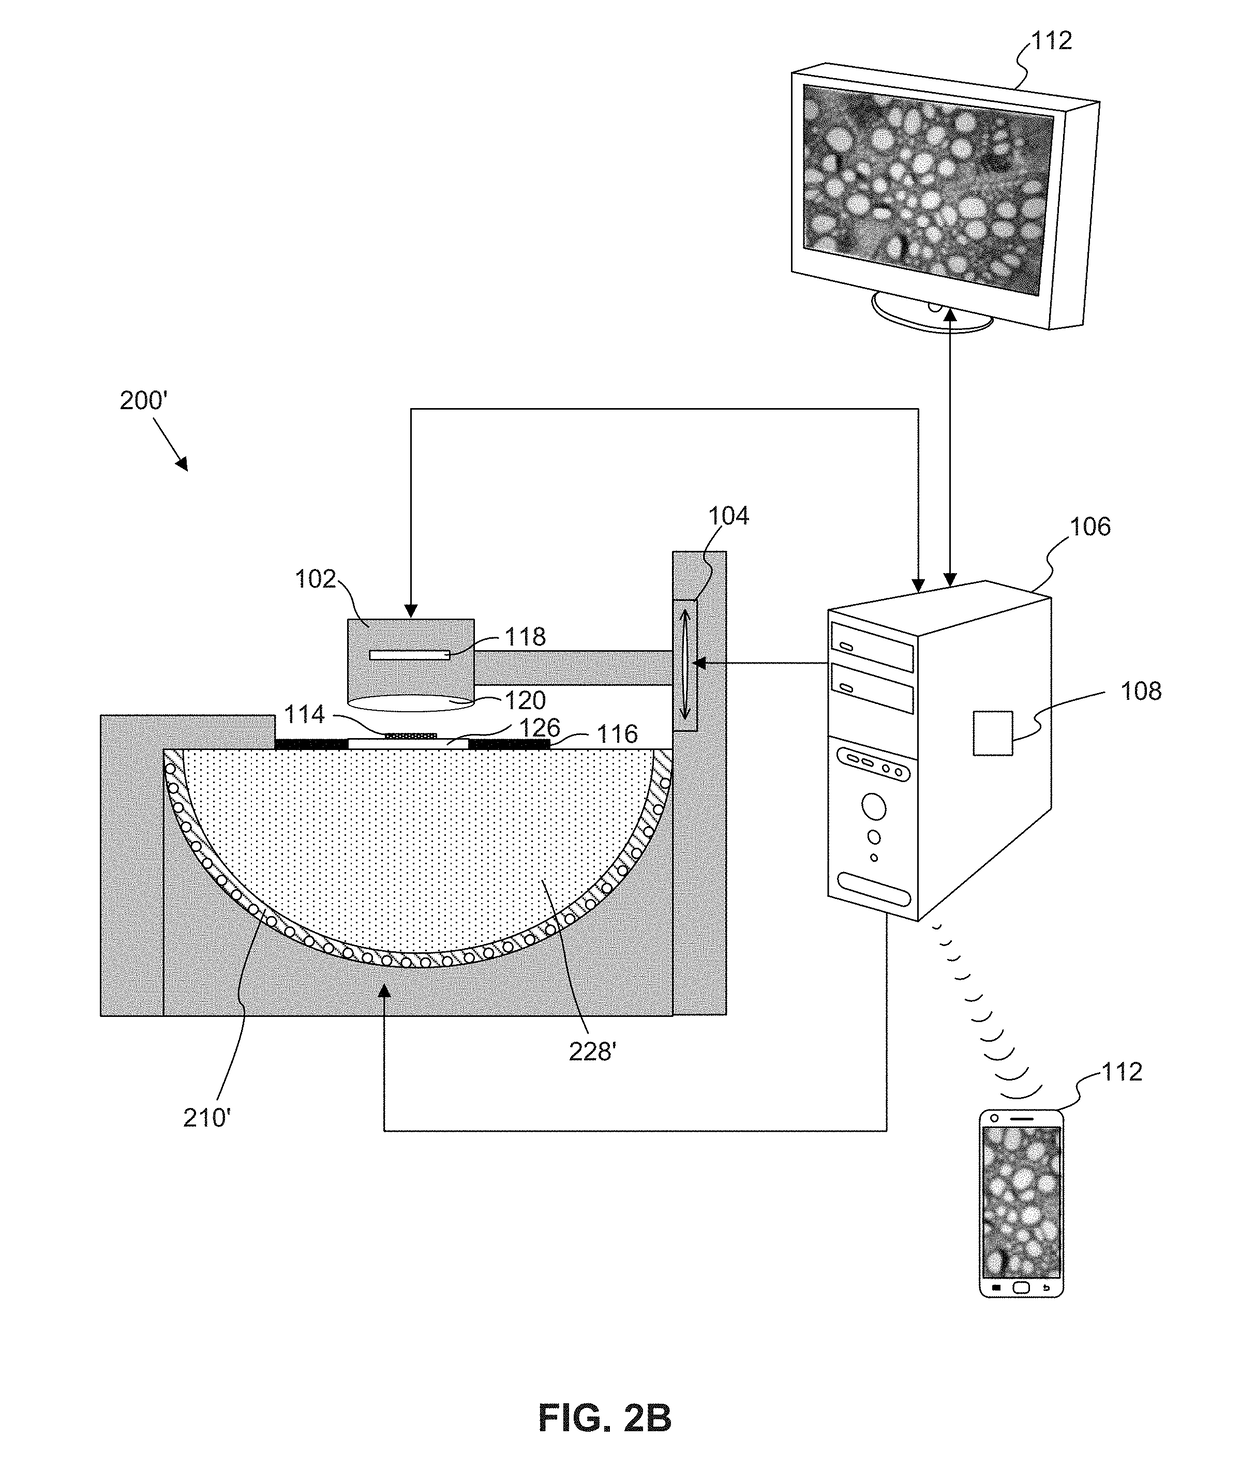 Microscope having a refractive index matching material